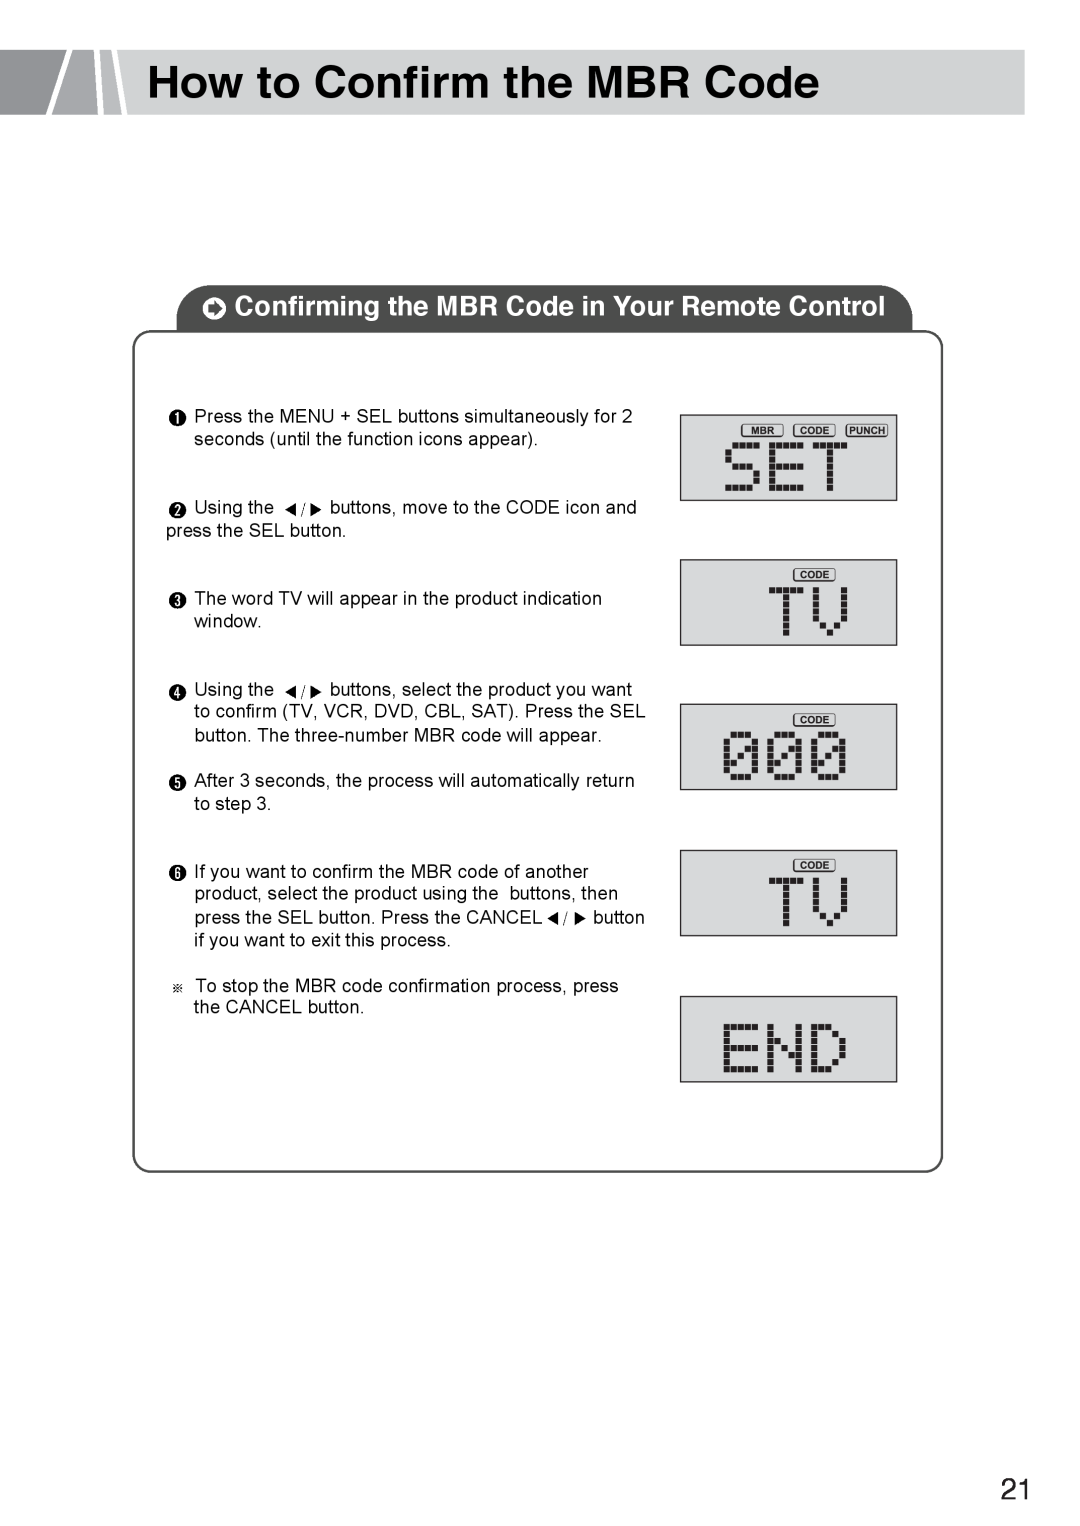 Humax L3040 owner manual How to Confirm the MBR Code, Confirming the MBR Code in Your Remote Control 